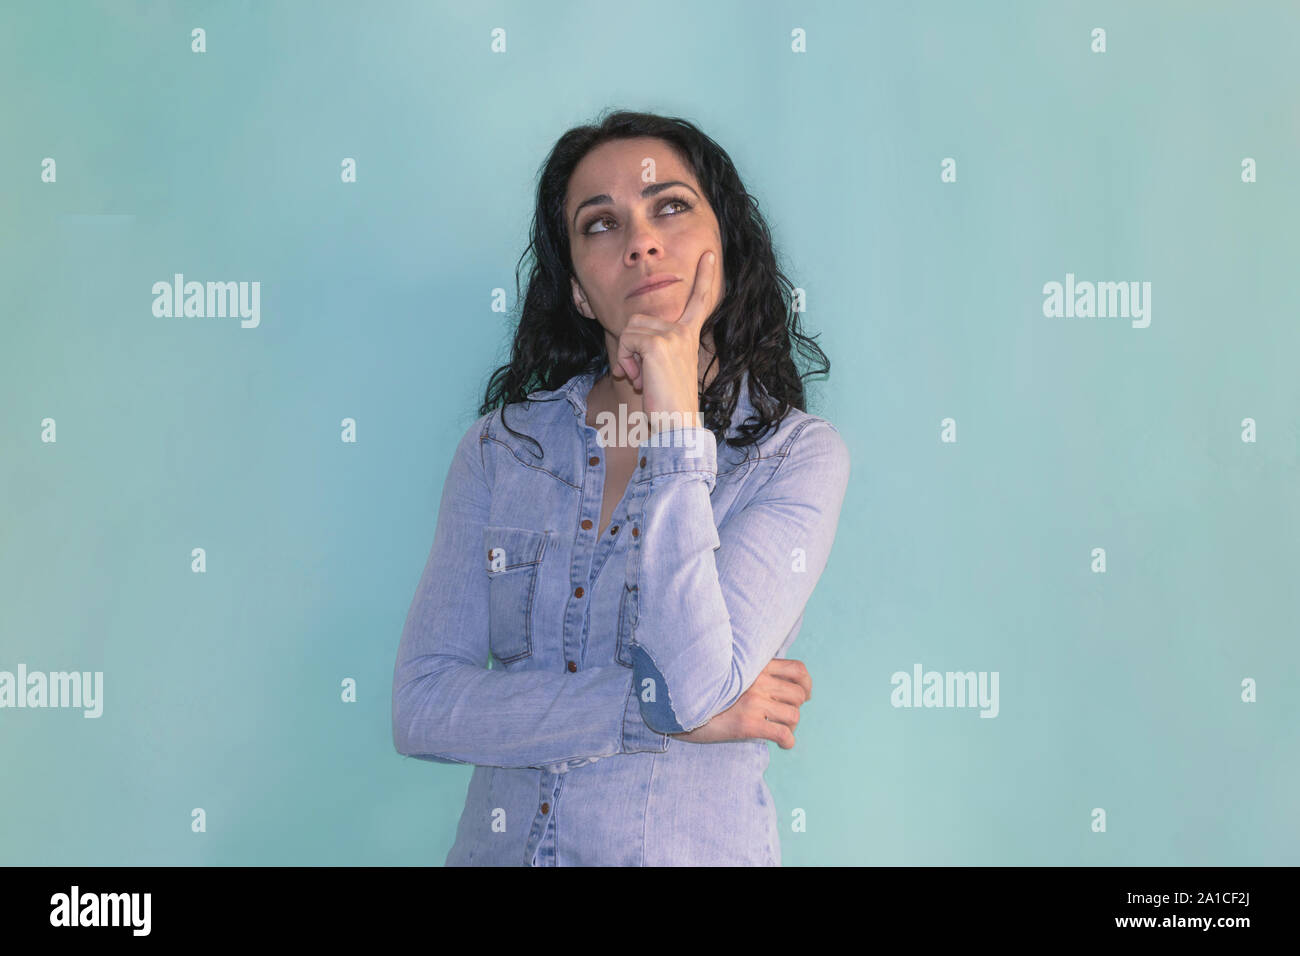 Brunette woman with her hand on her chin, thinking about some question, isolated on a blue background Stock Photo